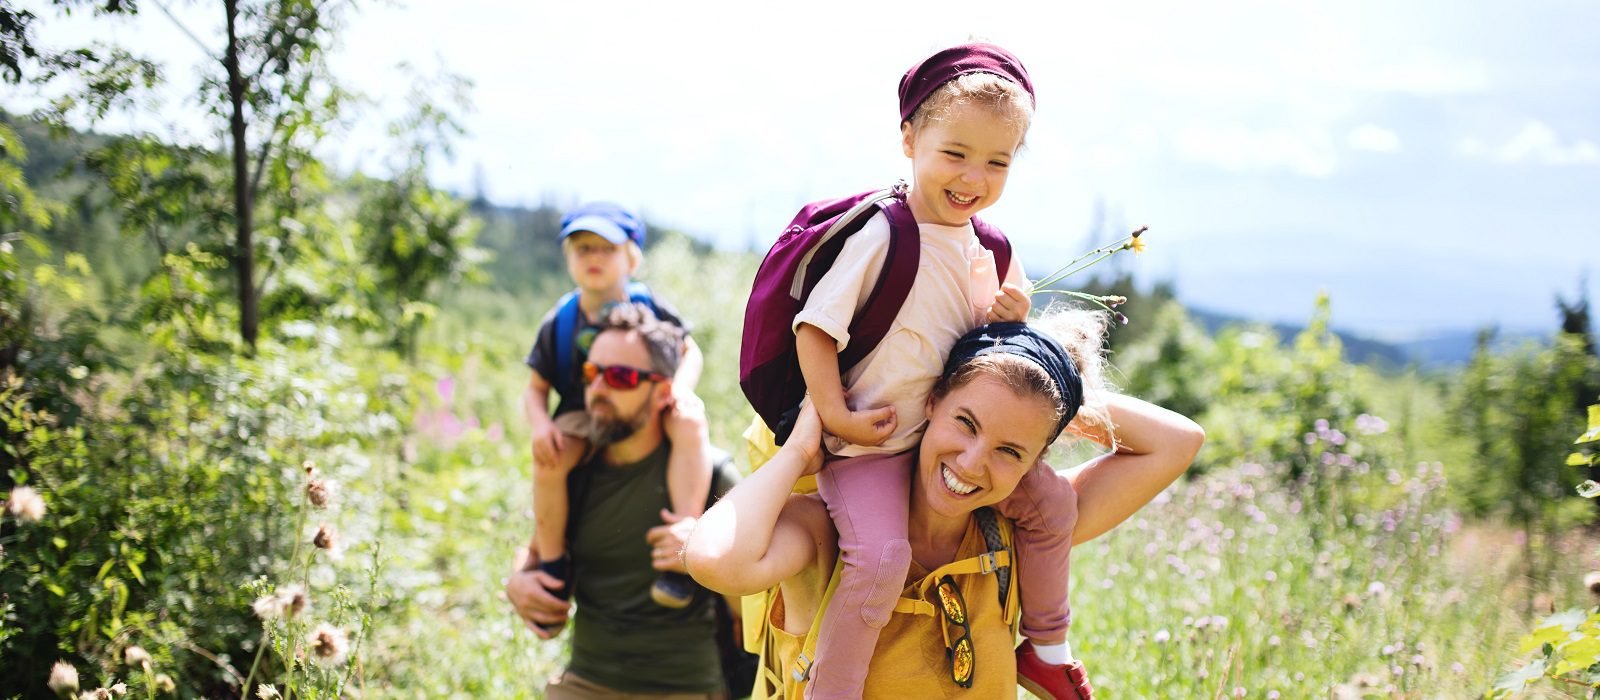 Front view of family with small children hiking outdoors in summer nature.